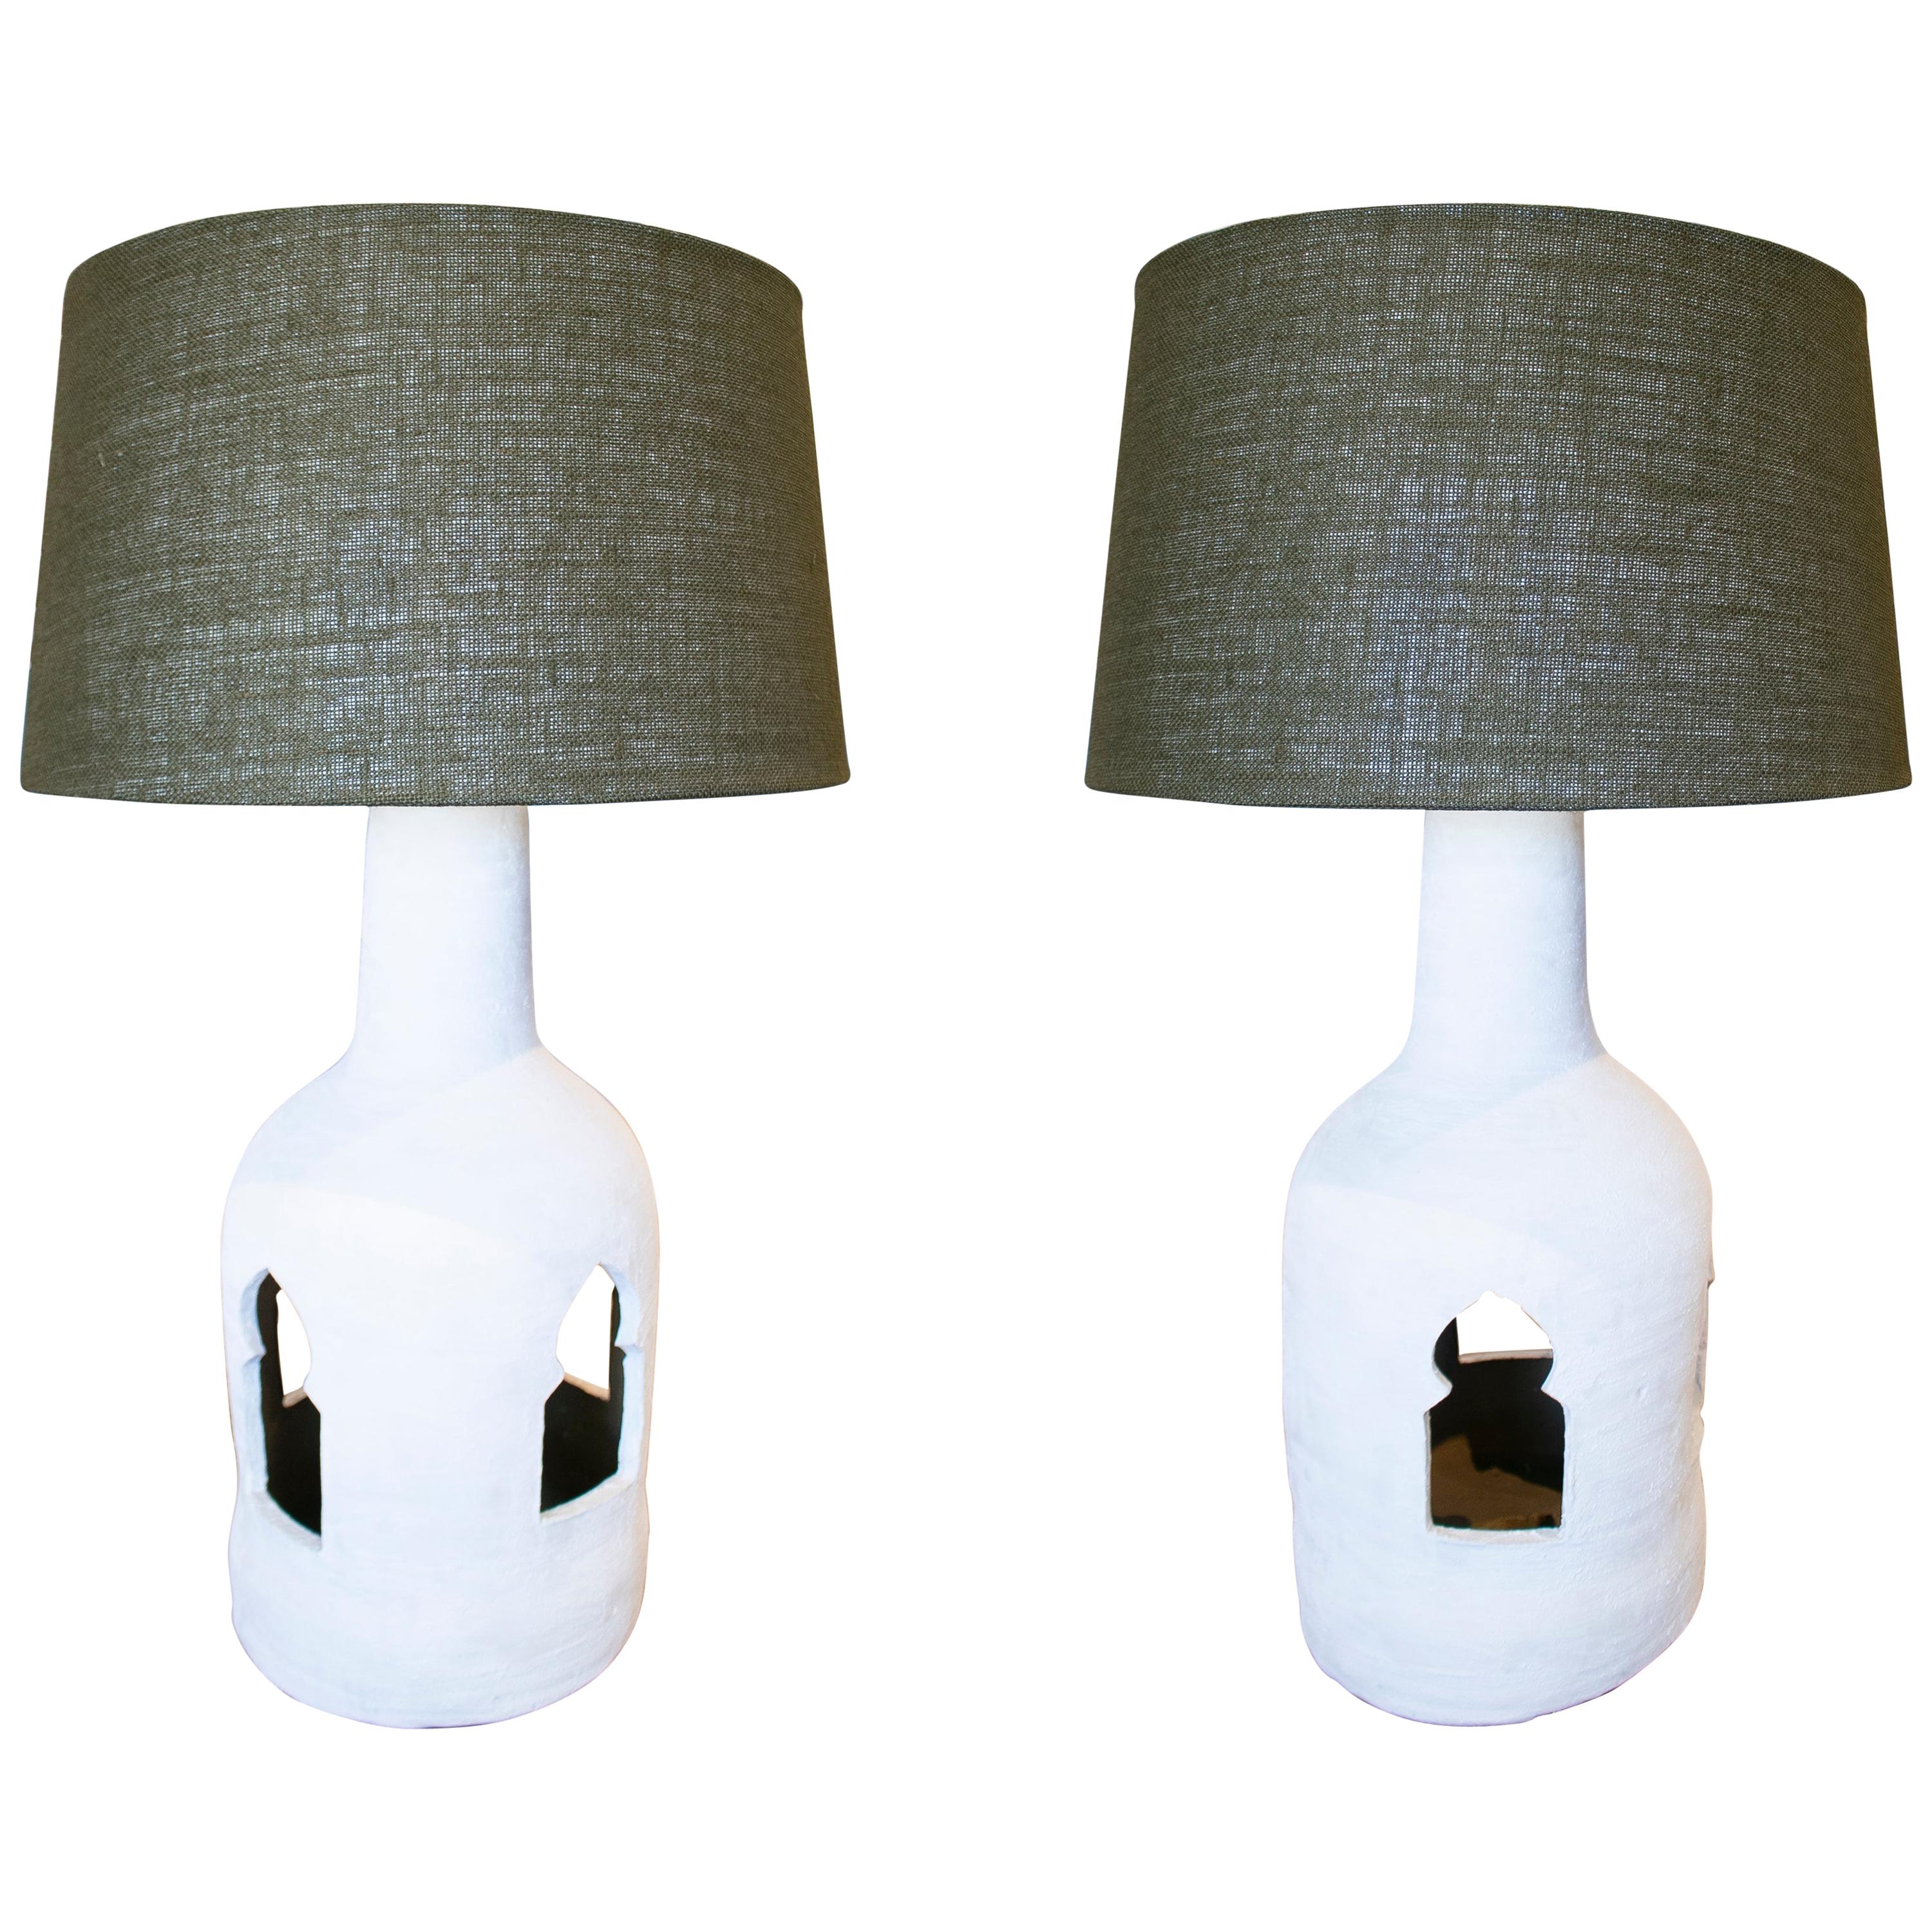 1970s Pair of Spanish Ceramic Table Lamps Painted in Chalk White